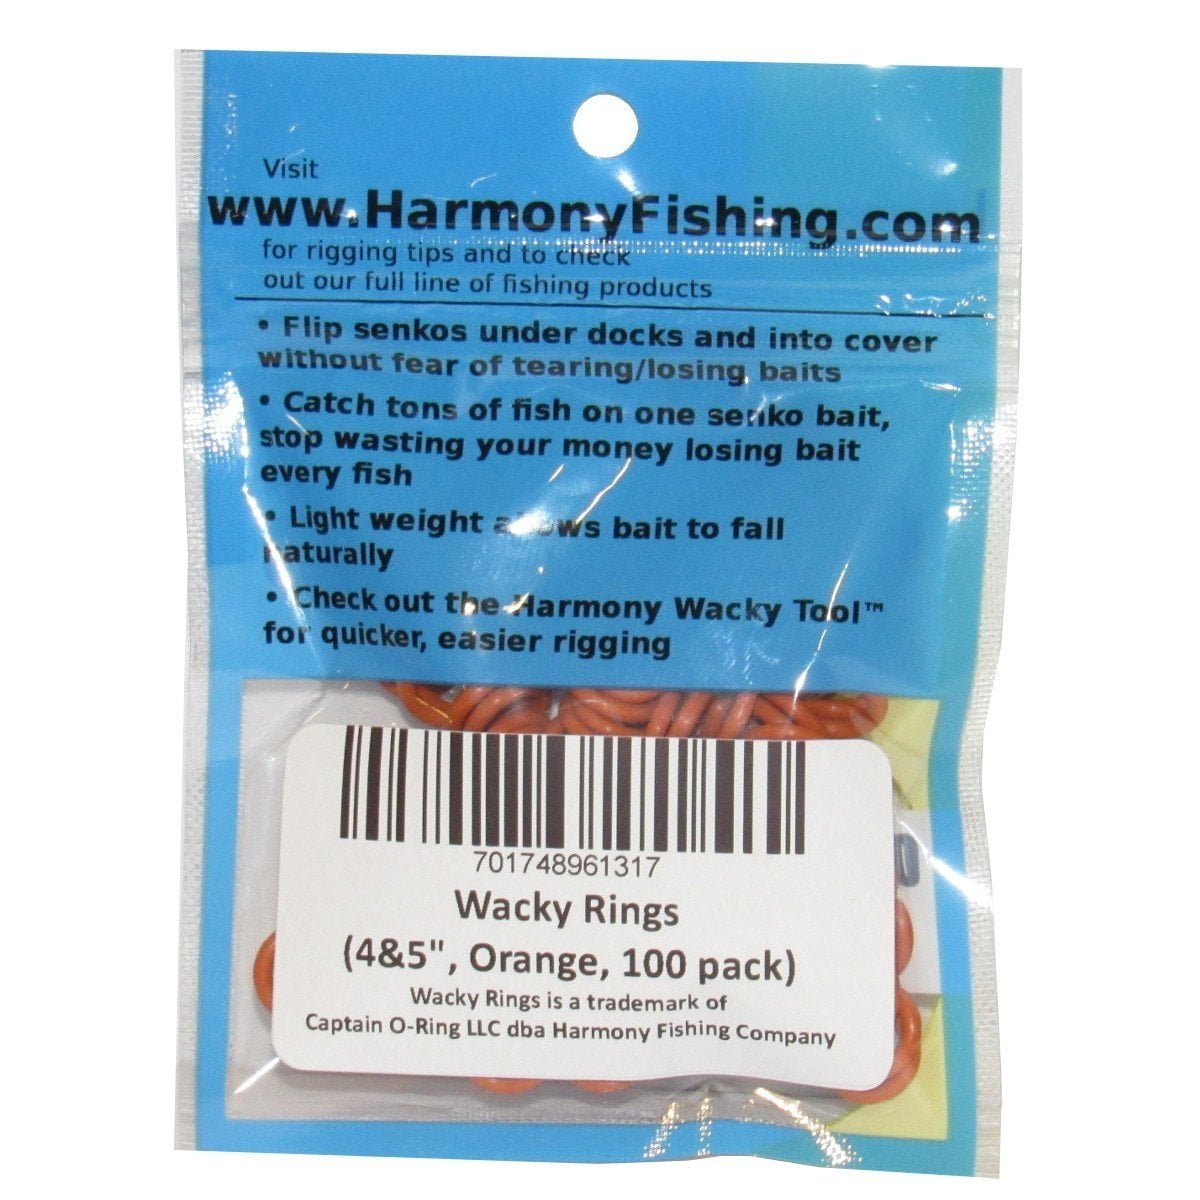 Wacky Rings - O-Rings for Wacky Rigging Senko Worms 100 orings for 4+5 inch  Senkos, Available in many colors 